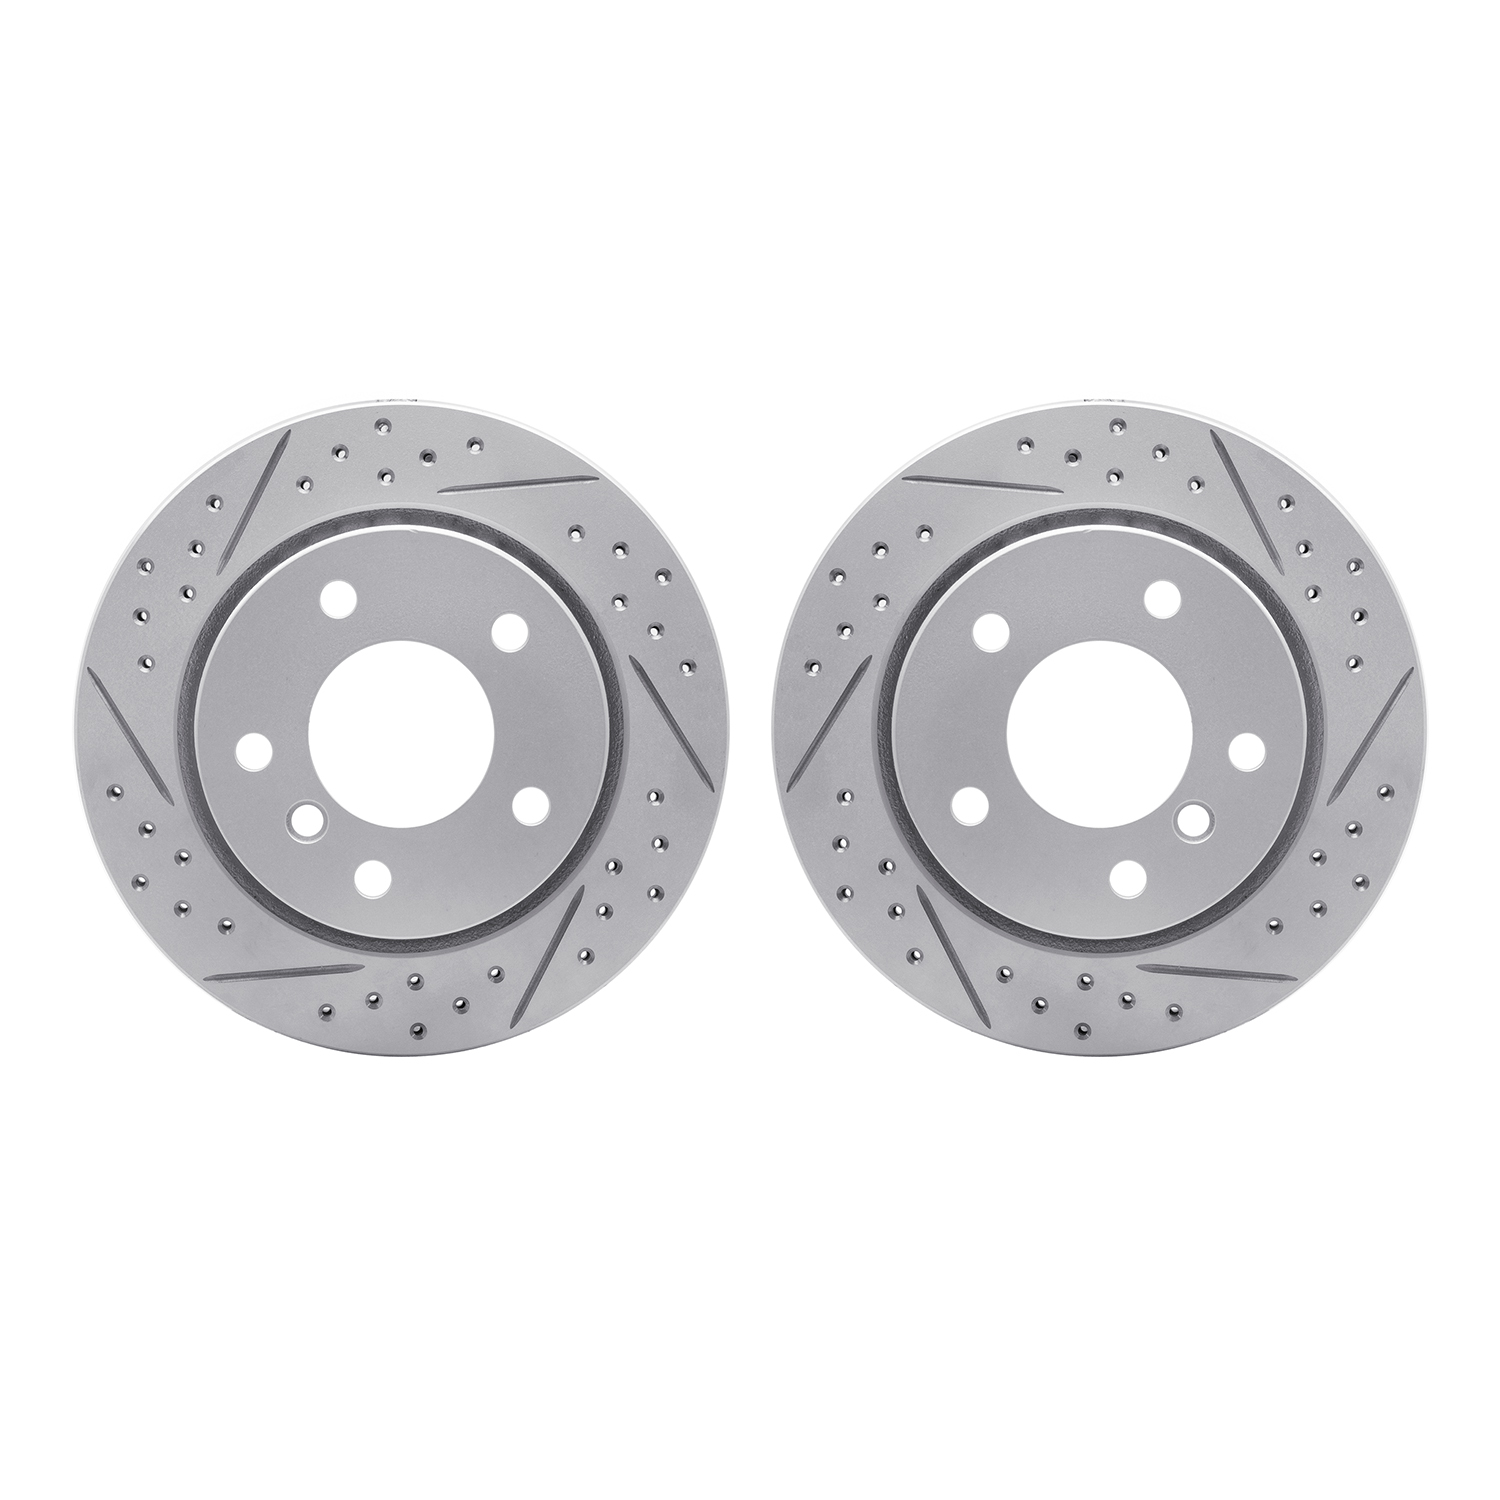 2002-31061 Geoperformance Drilled/Slotted Brake Rotors, 1996-2005 BMW, Position: Rear